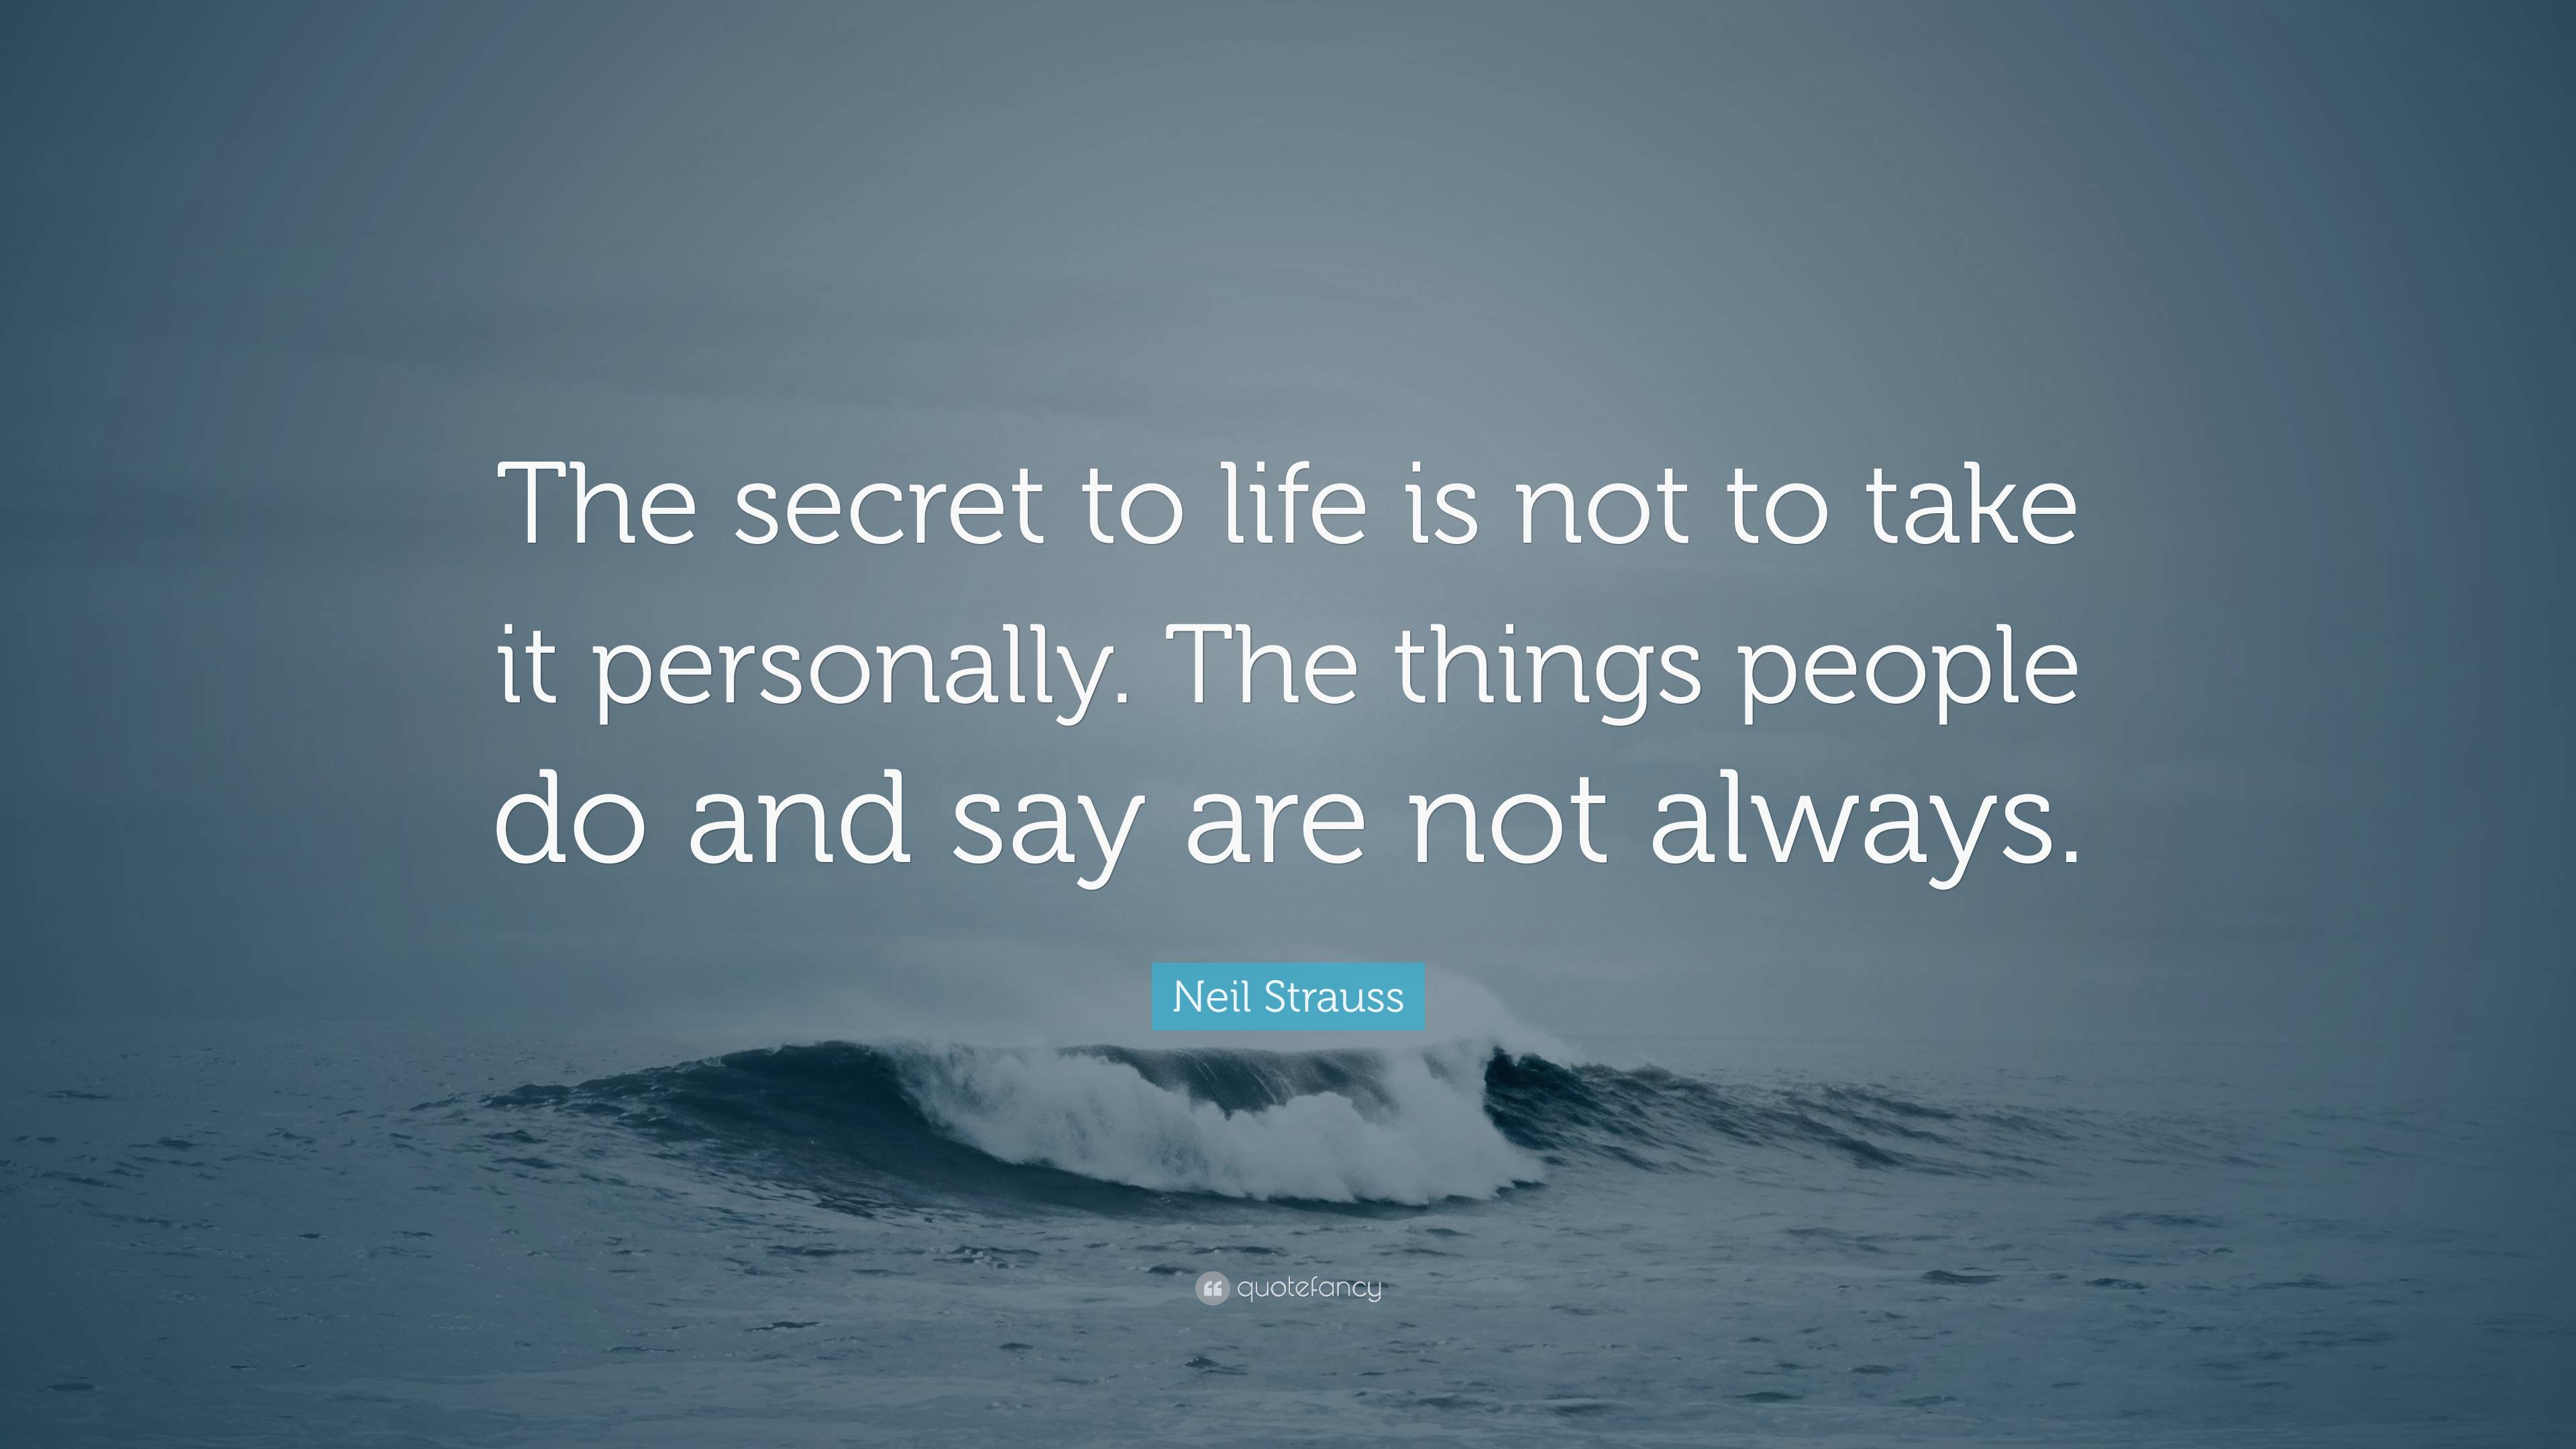 Neil Strauss Quote: “The secret to life is not to take it personally ...